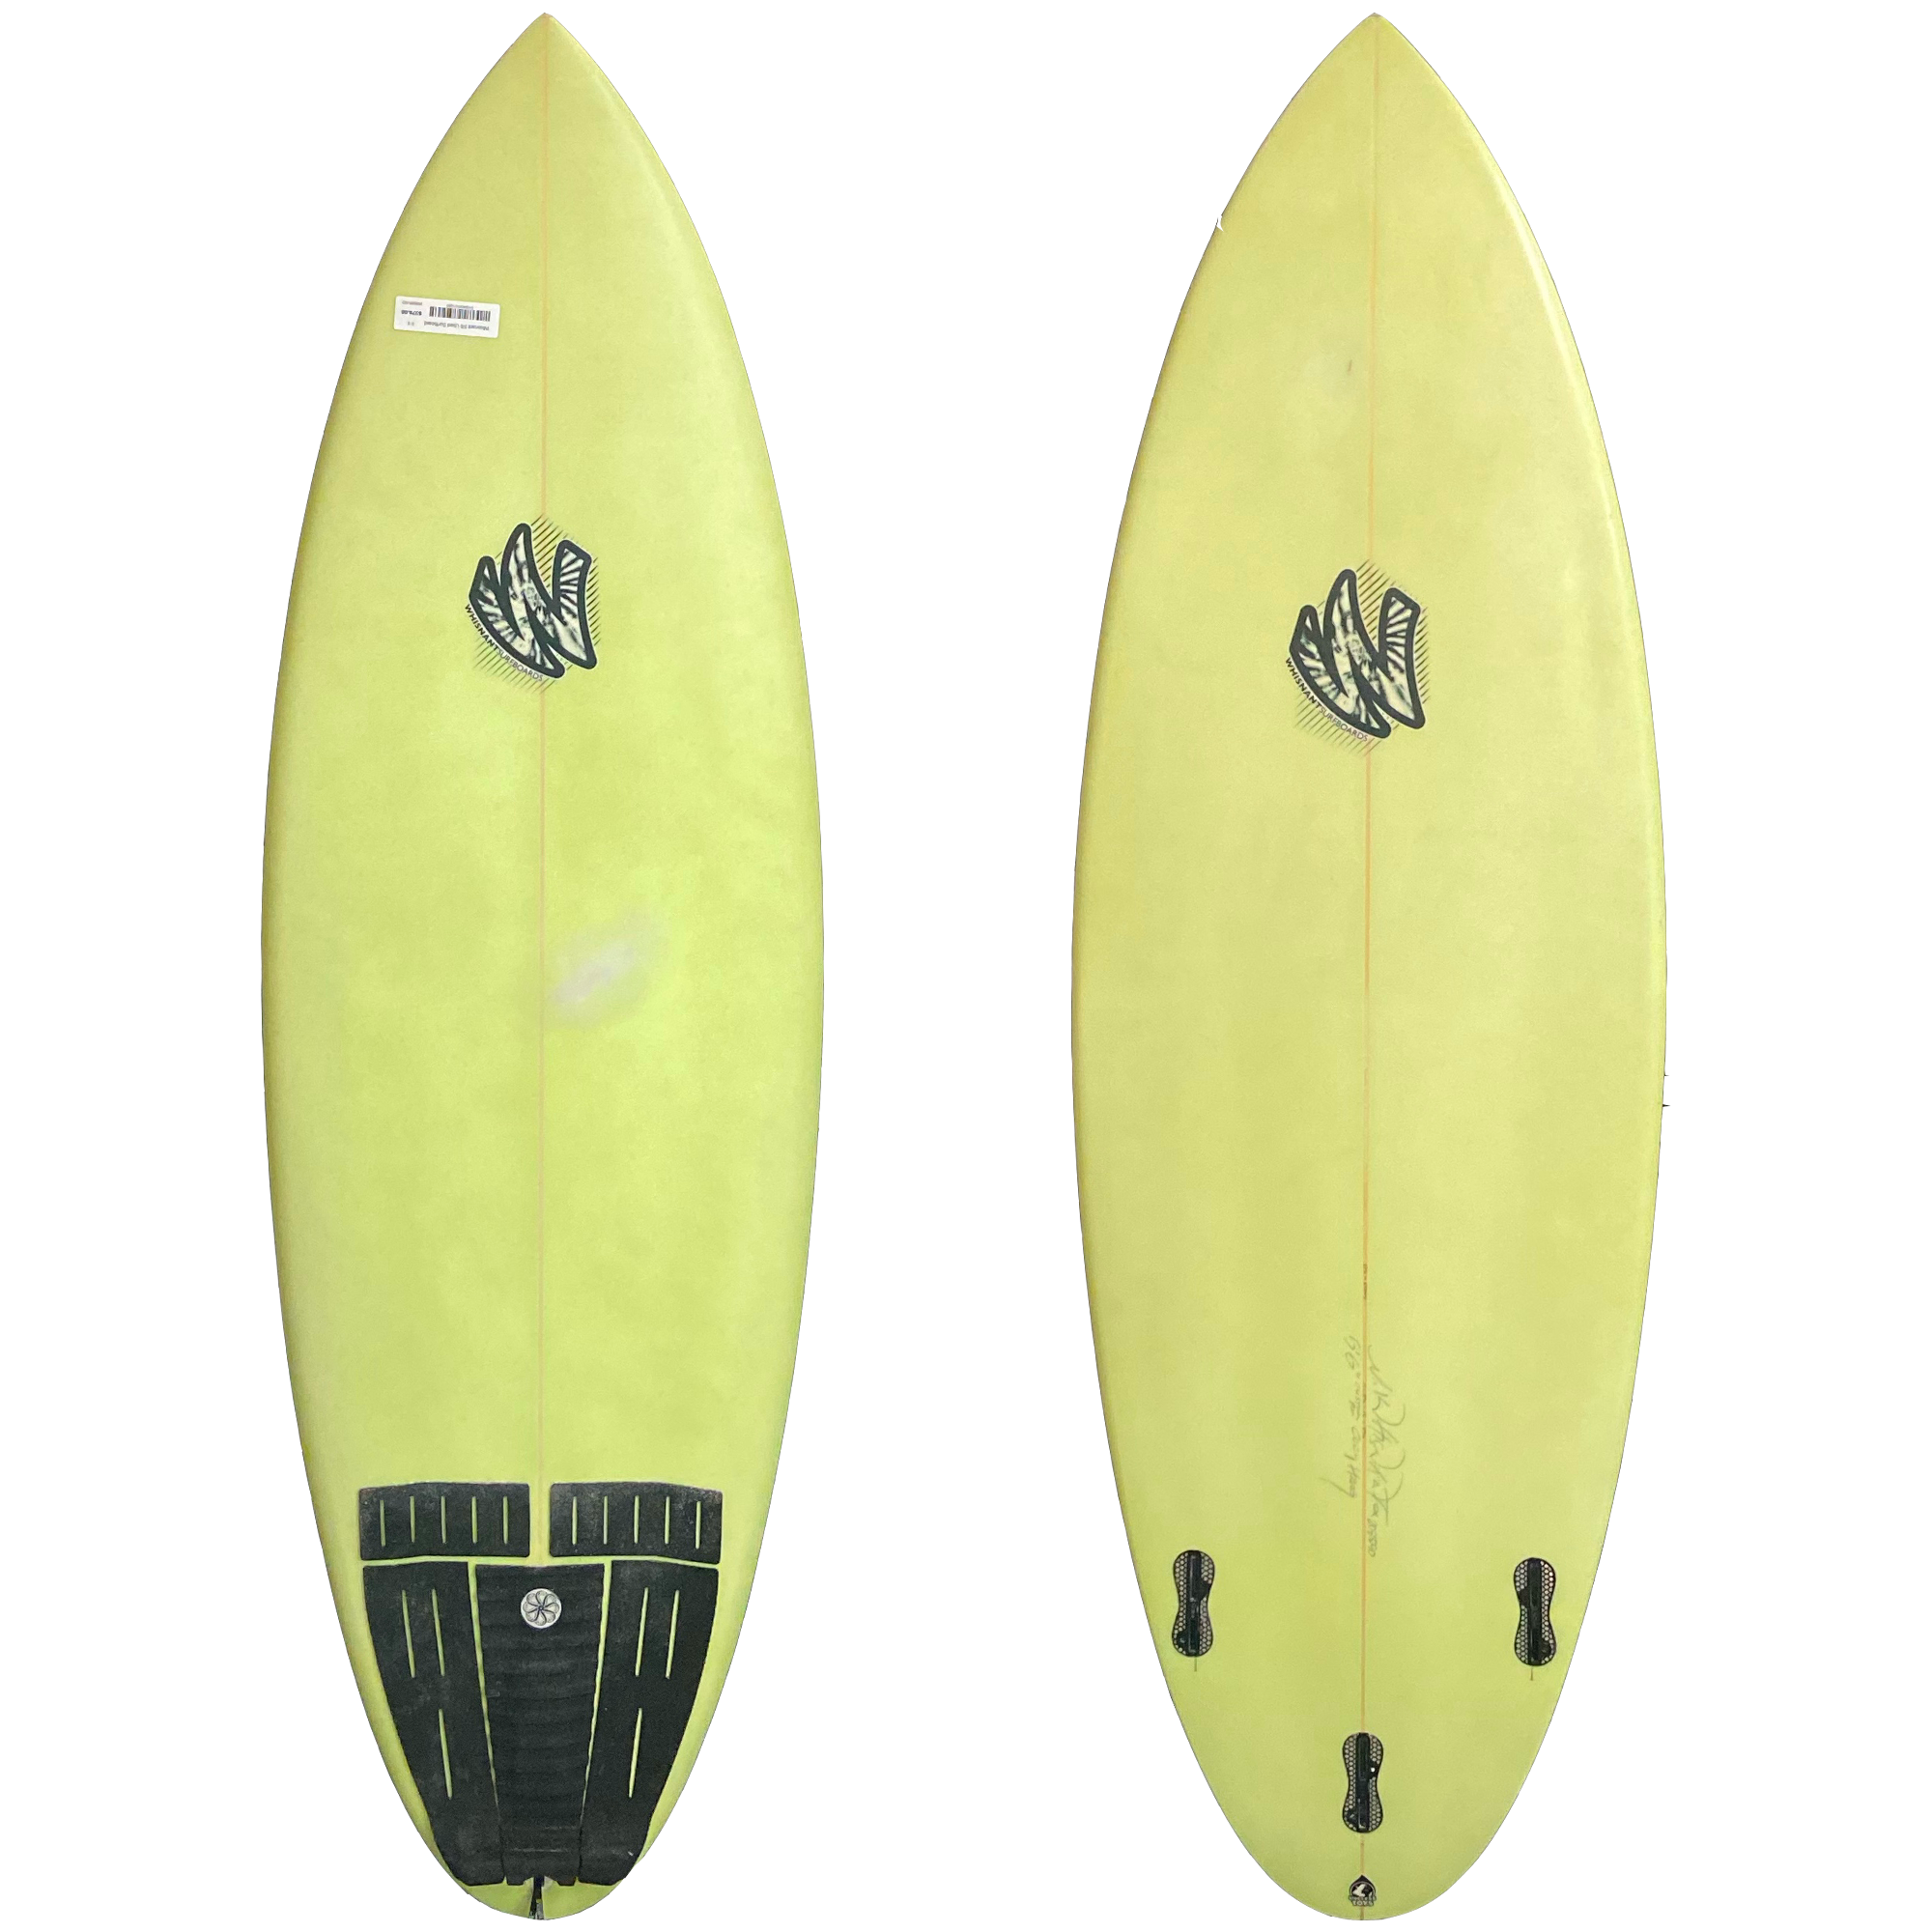 Whisnant 5'6 Used Surfboard